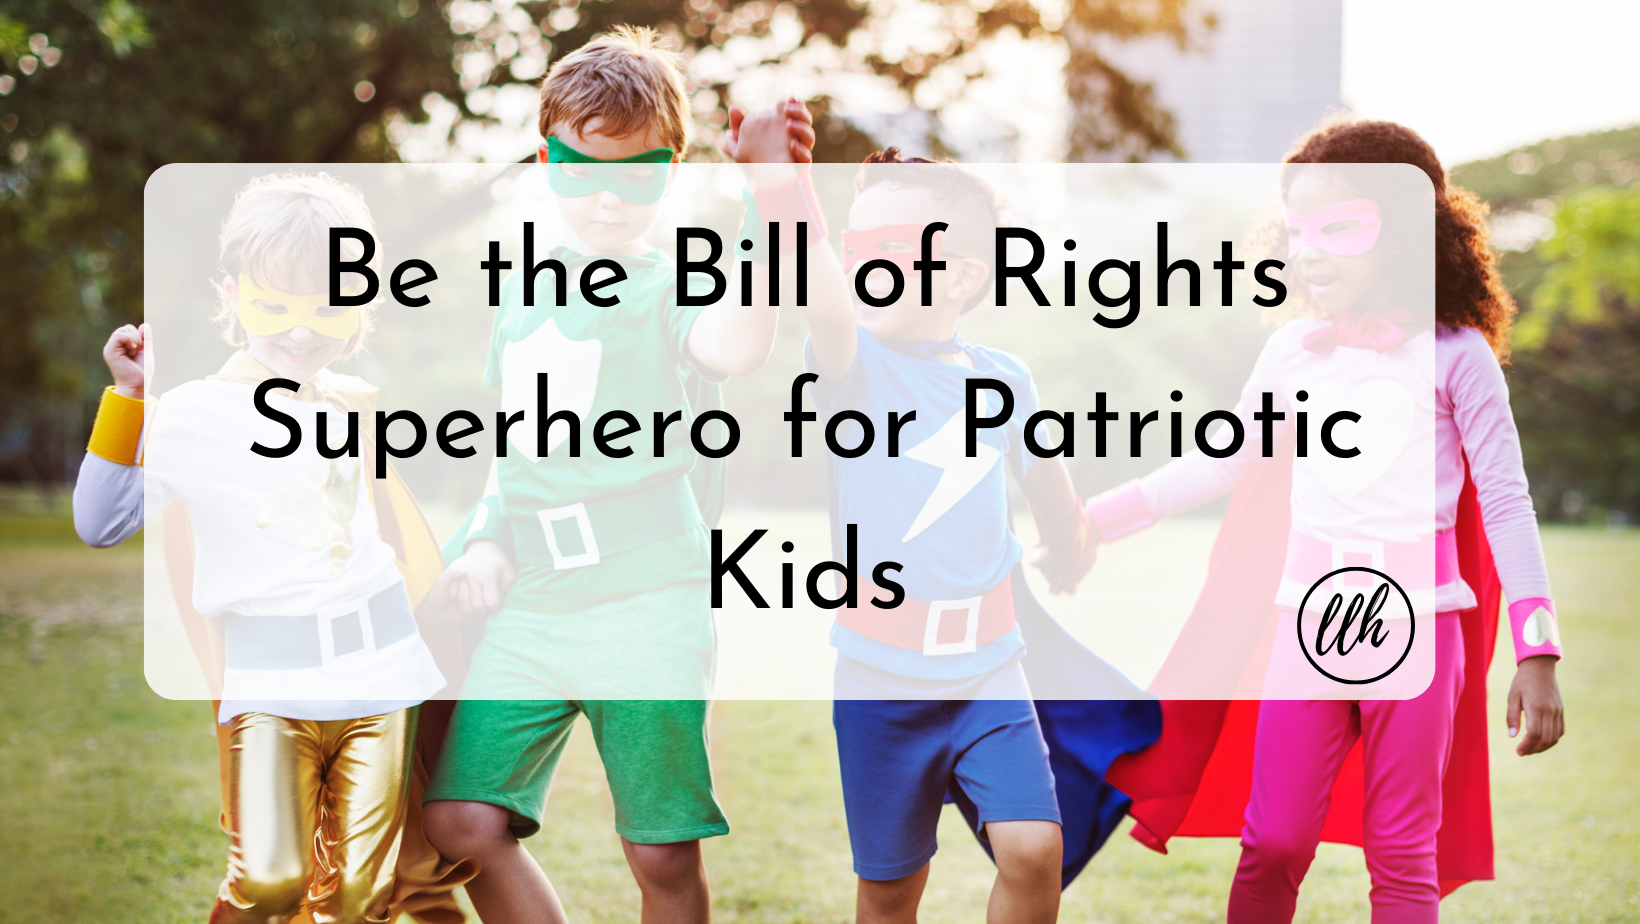 Be the Bill of Rights Superhero for Patriotic Kids